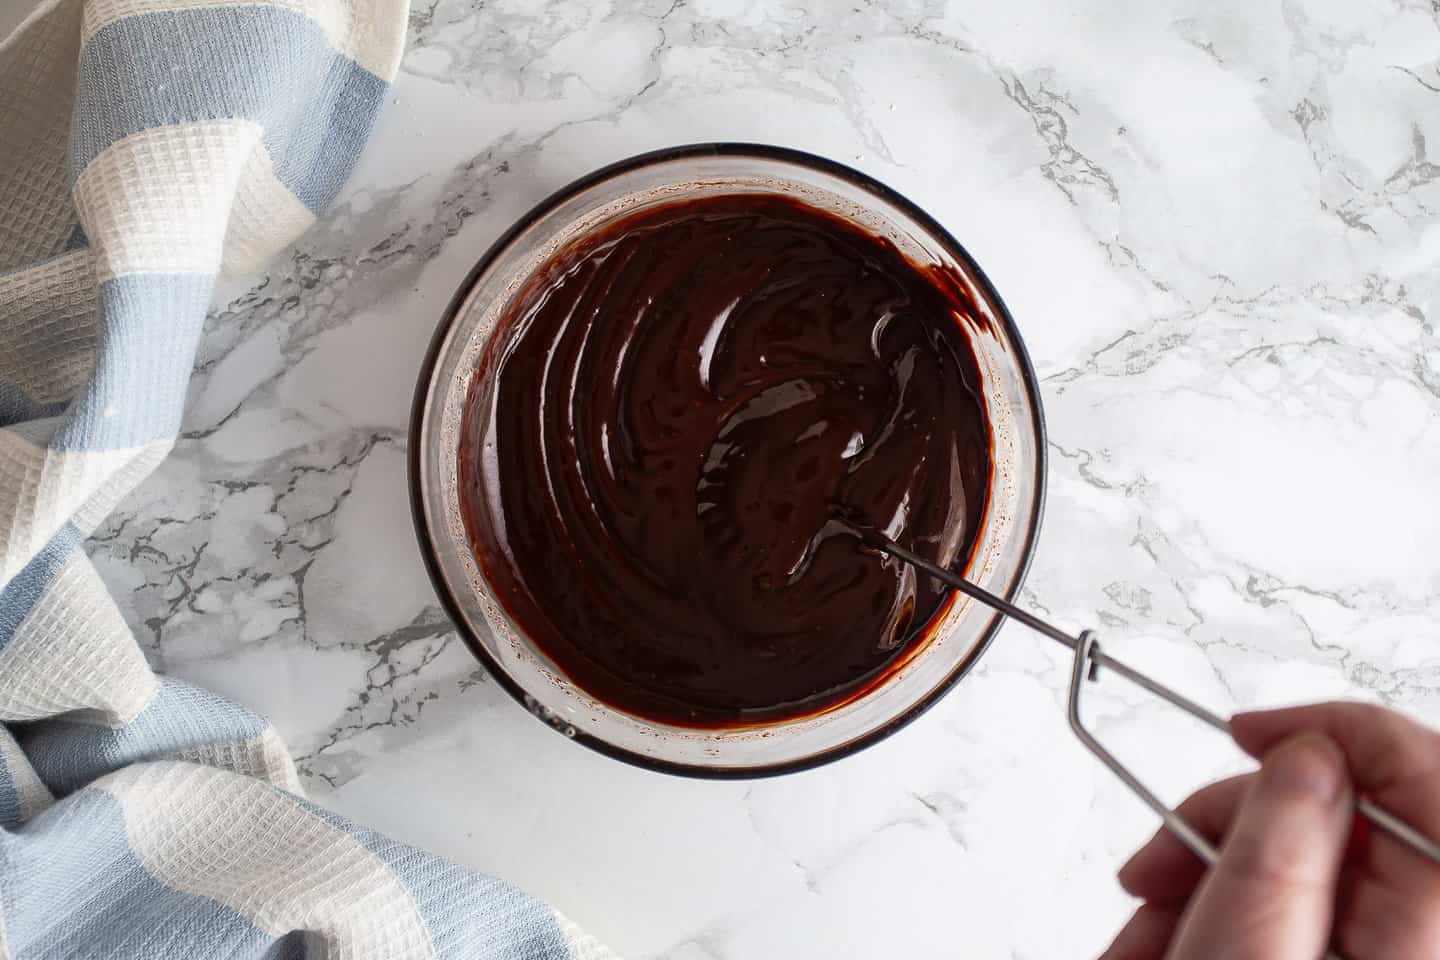 Freshly made ganache being whisked together in a glass bowl.